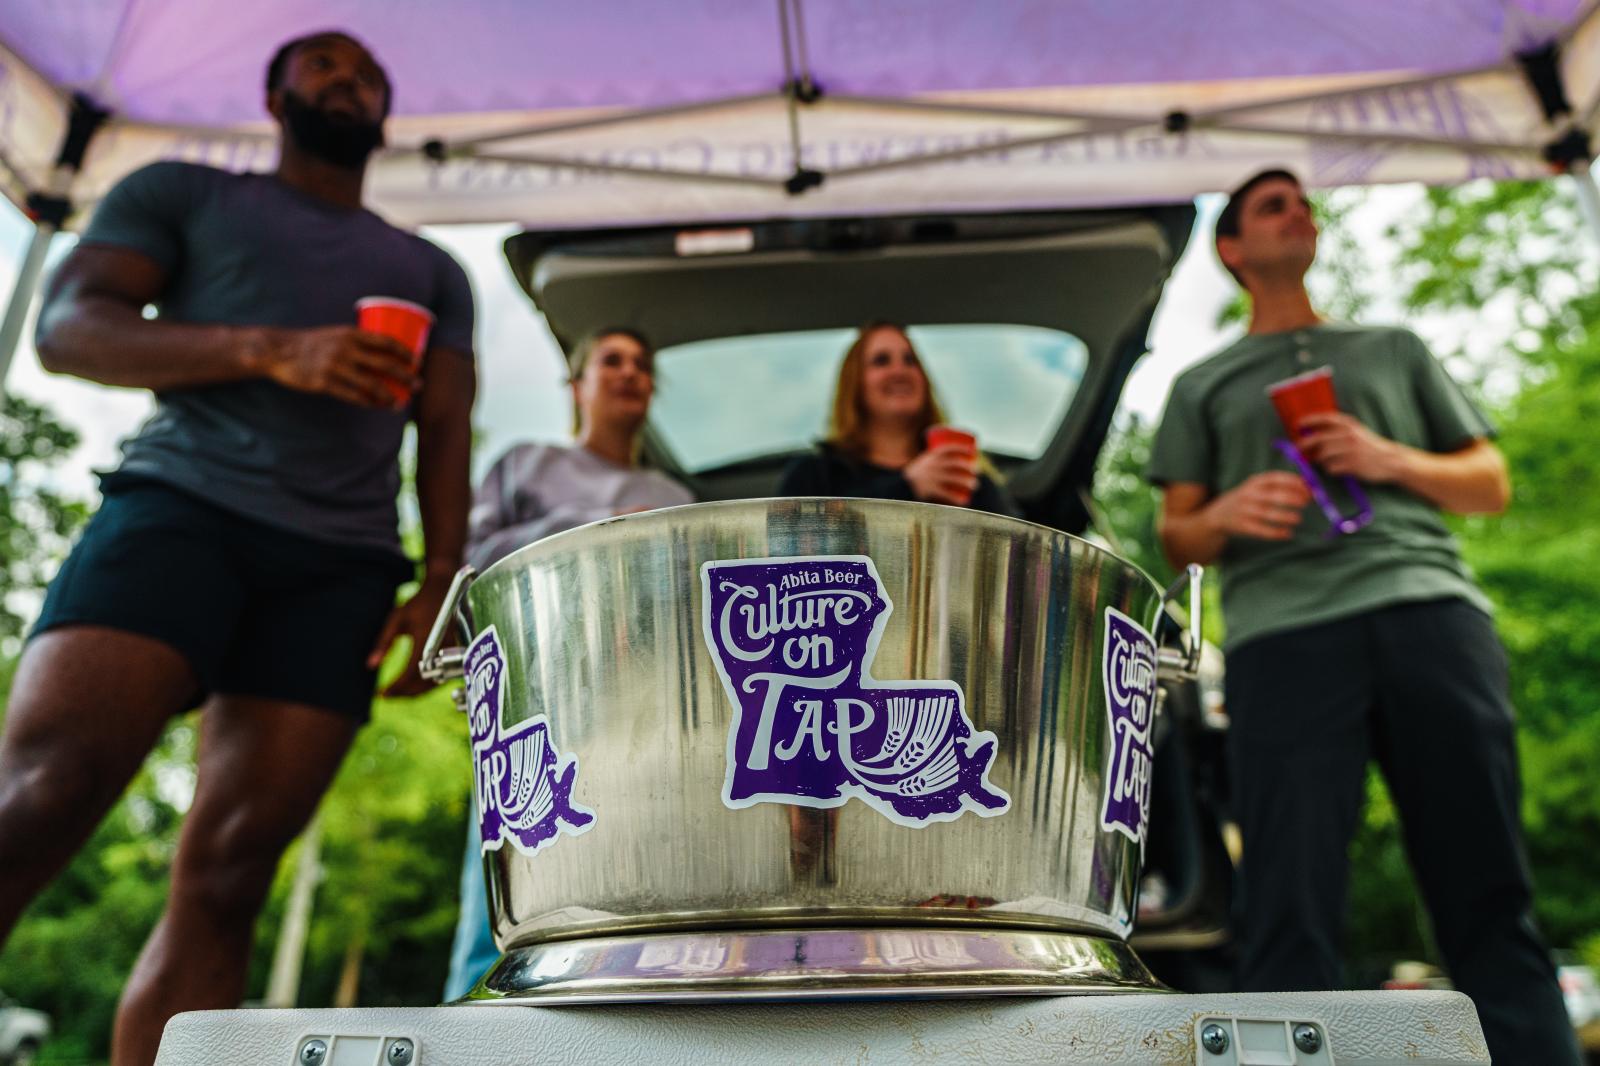 Image from Abita: Tailgate -   United States